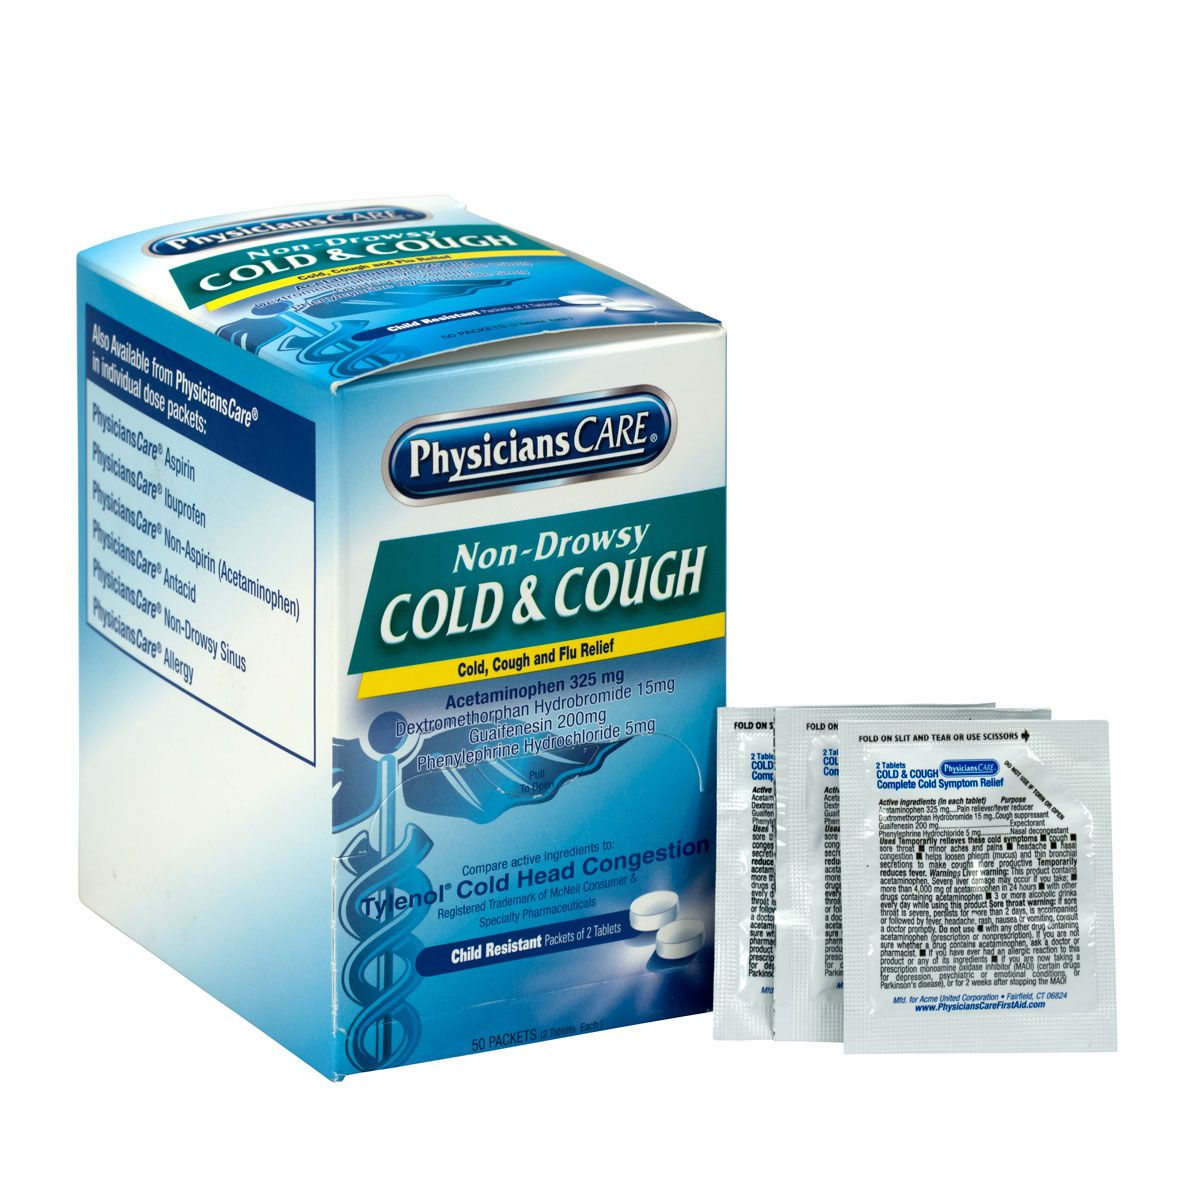 PhysiciansCare Cold & Cough Congestion Medication, 50x2/Box - First Aid Safety